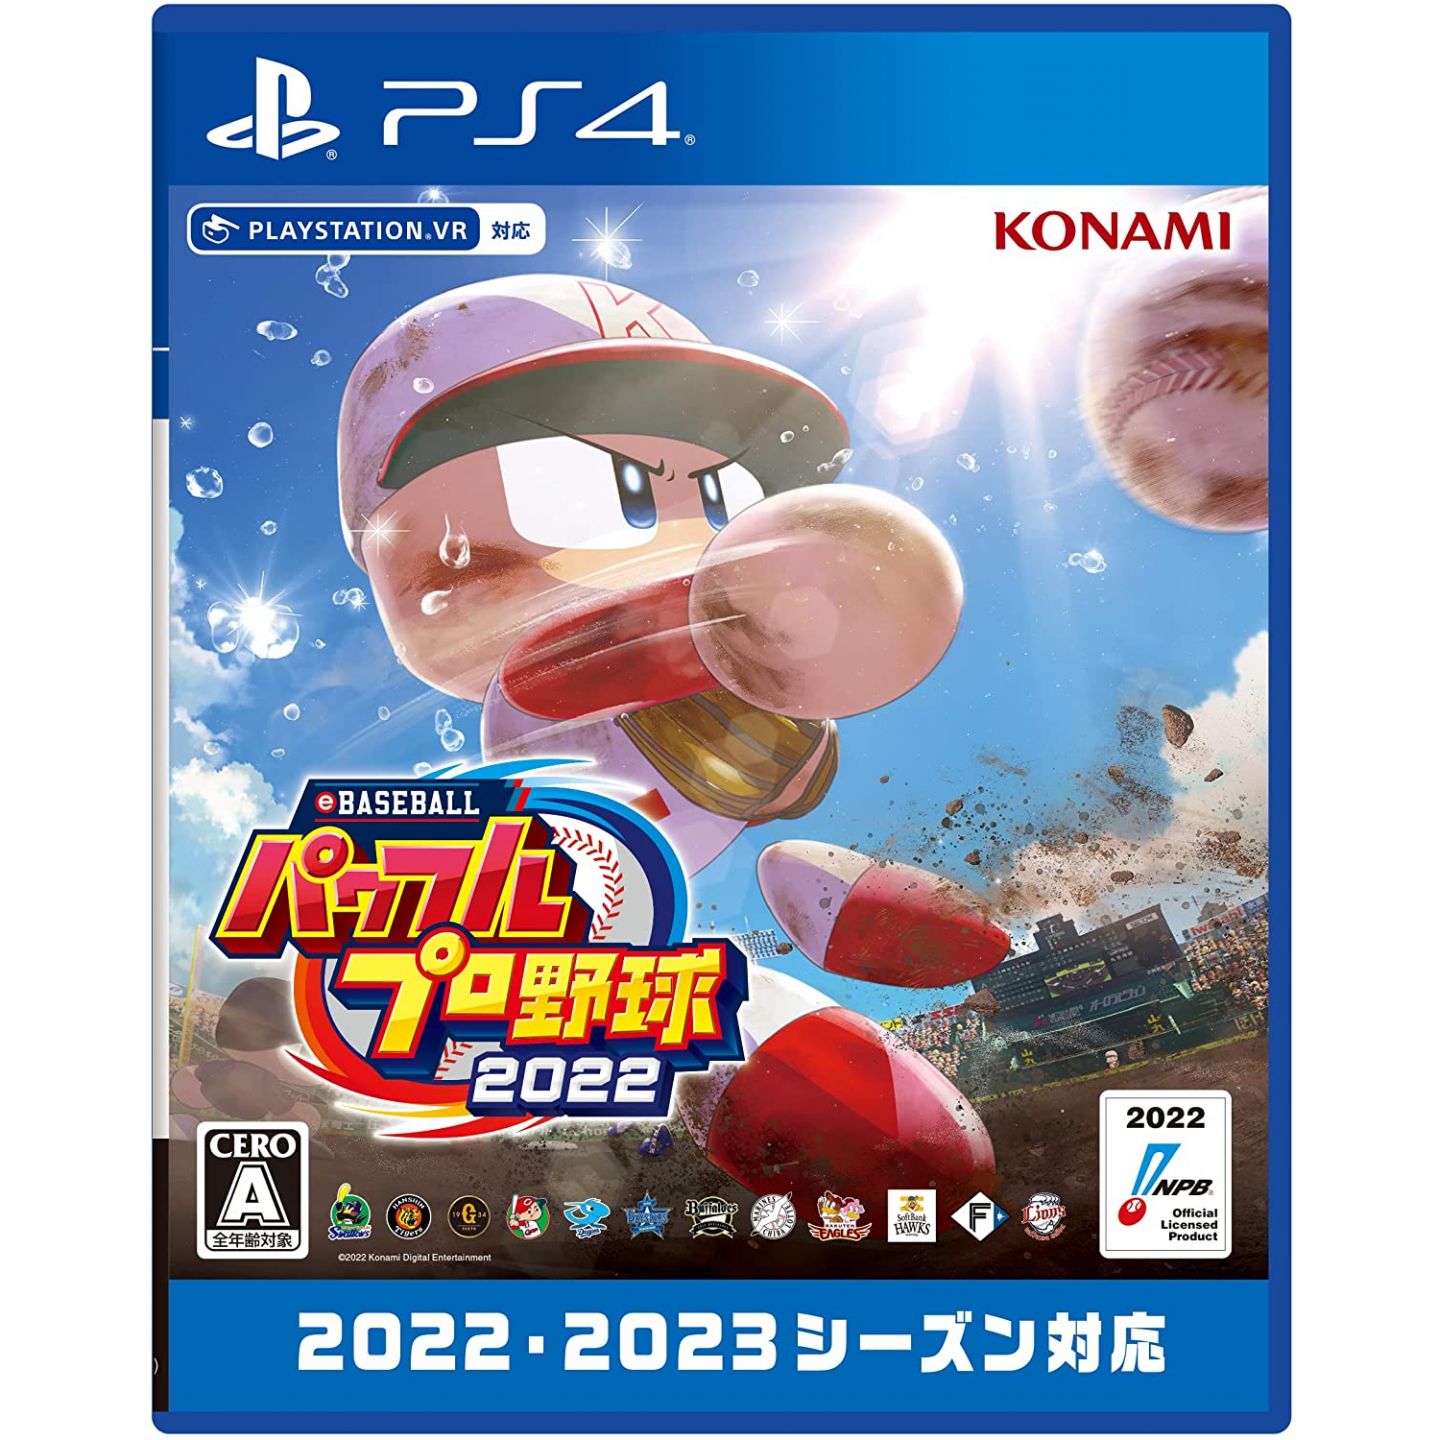 Super Mario on PS4 in 2023 